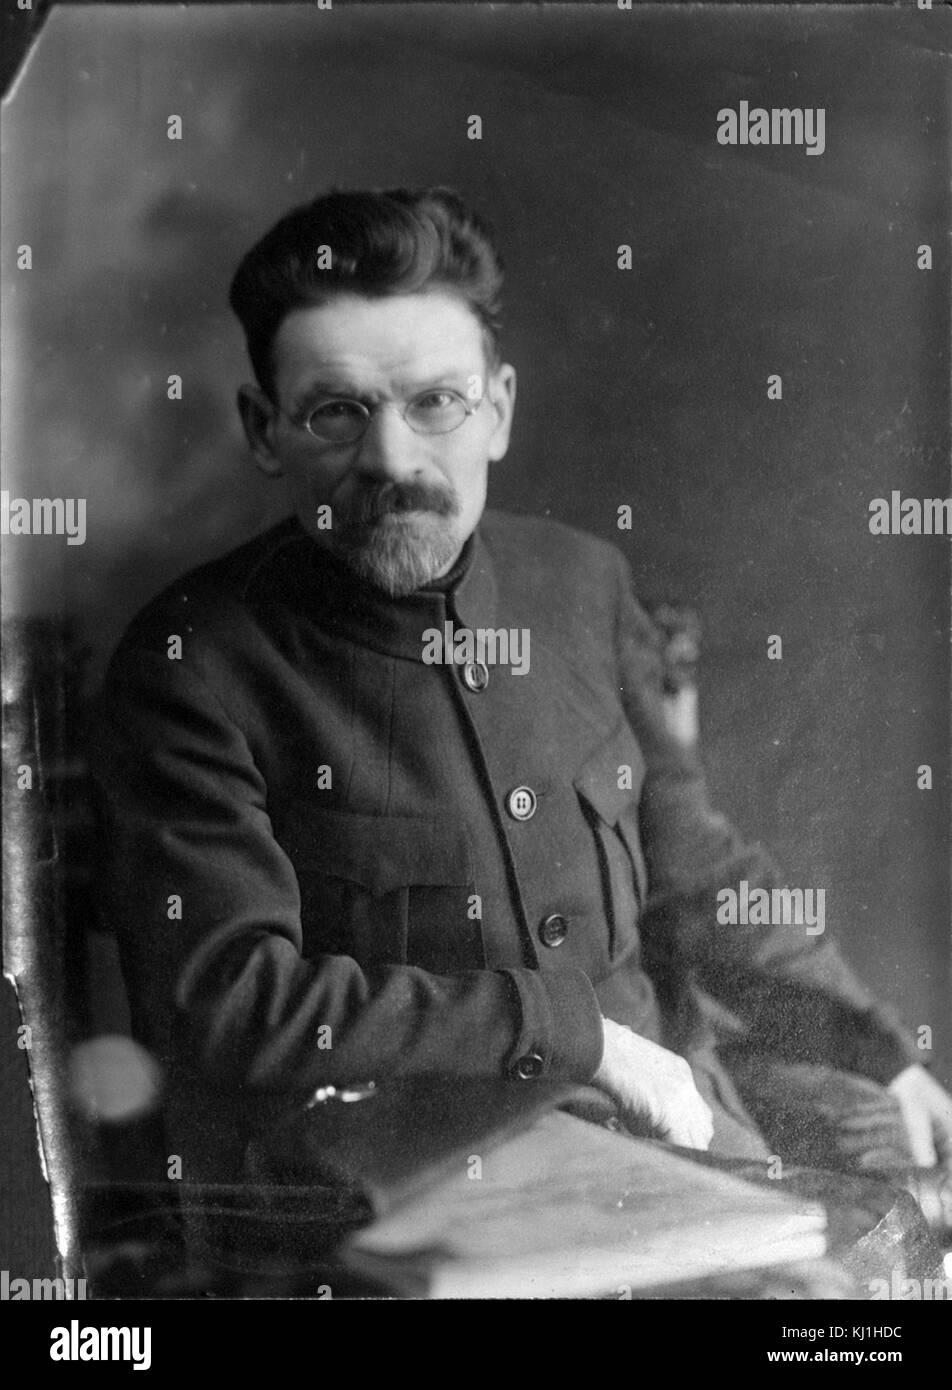 Mikhail Ivanovich Kalinin (1875 – 1946), Bolshevik revolutionary and Marxist–Leninist functionary. He served as head of state of the Russian Soviet Federative Socialist Republic and later of the Soviet Union from 1919 to 1946 Stock Photo